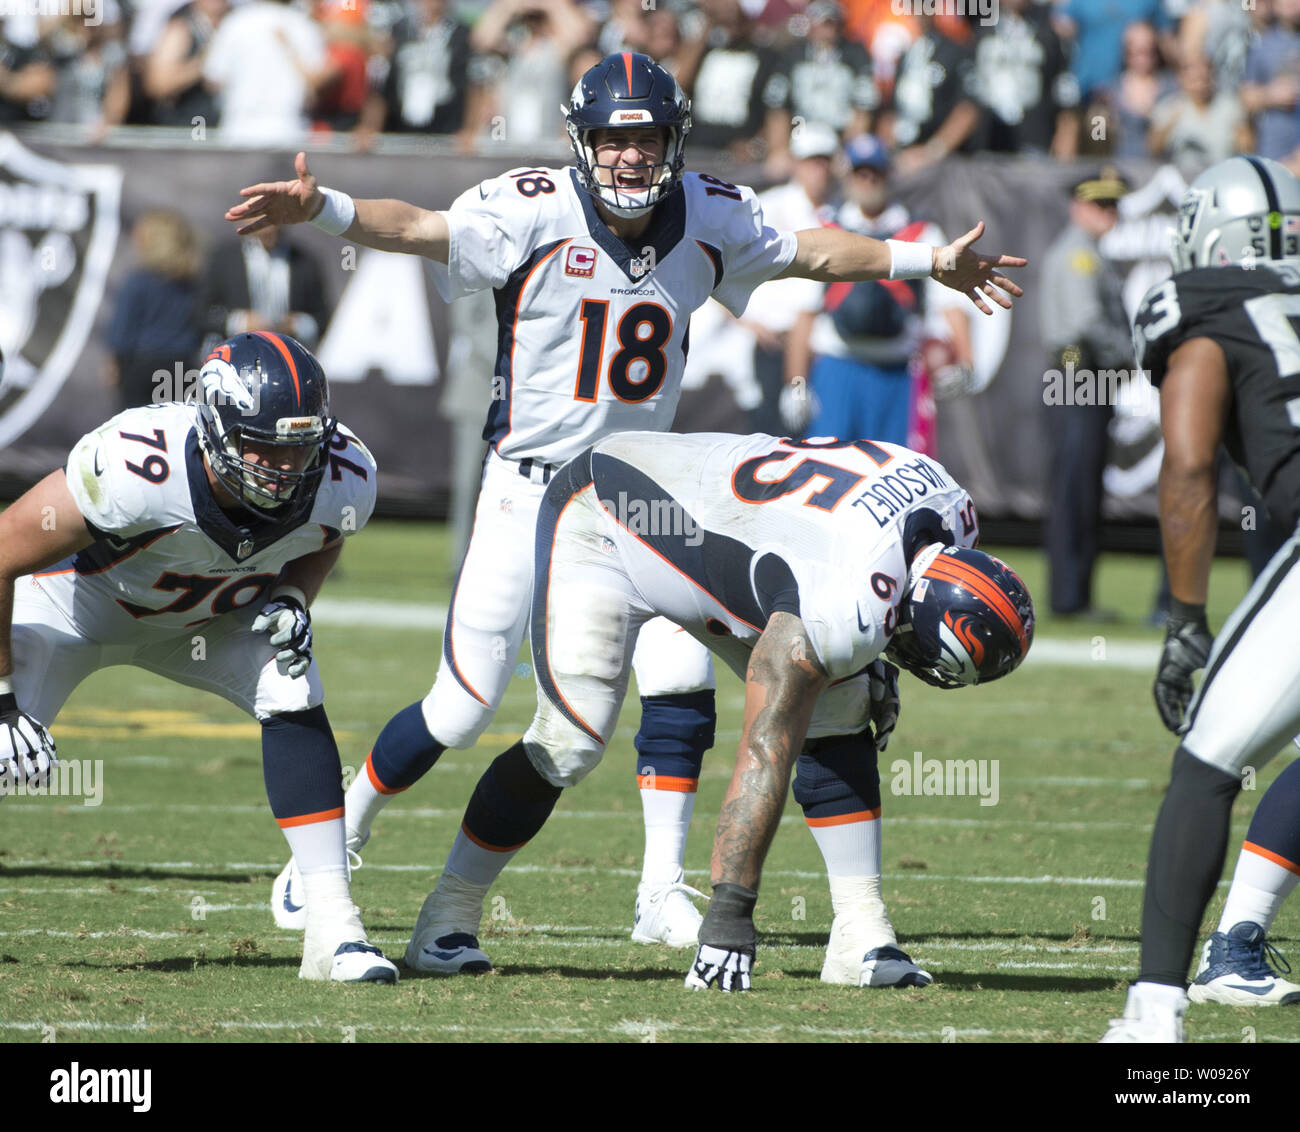 Denver Broncos QB Peyton Manning changes the call at the line in the second quarter against the Oakland Raiders at O.co Coliseum in Oakland, California on October 11, 2015. The Broncos defeated the Raiders 16-10.  Photo by Terry Schmitt/UPI Stock Photo